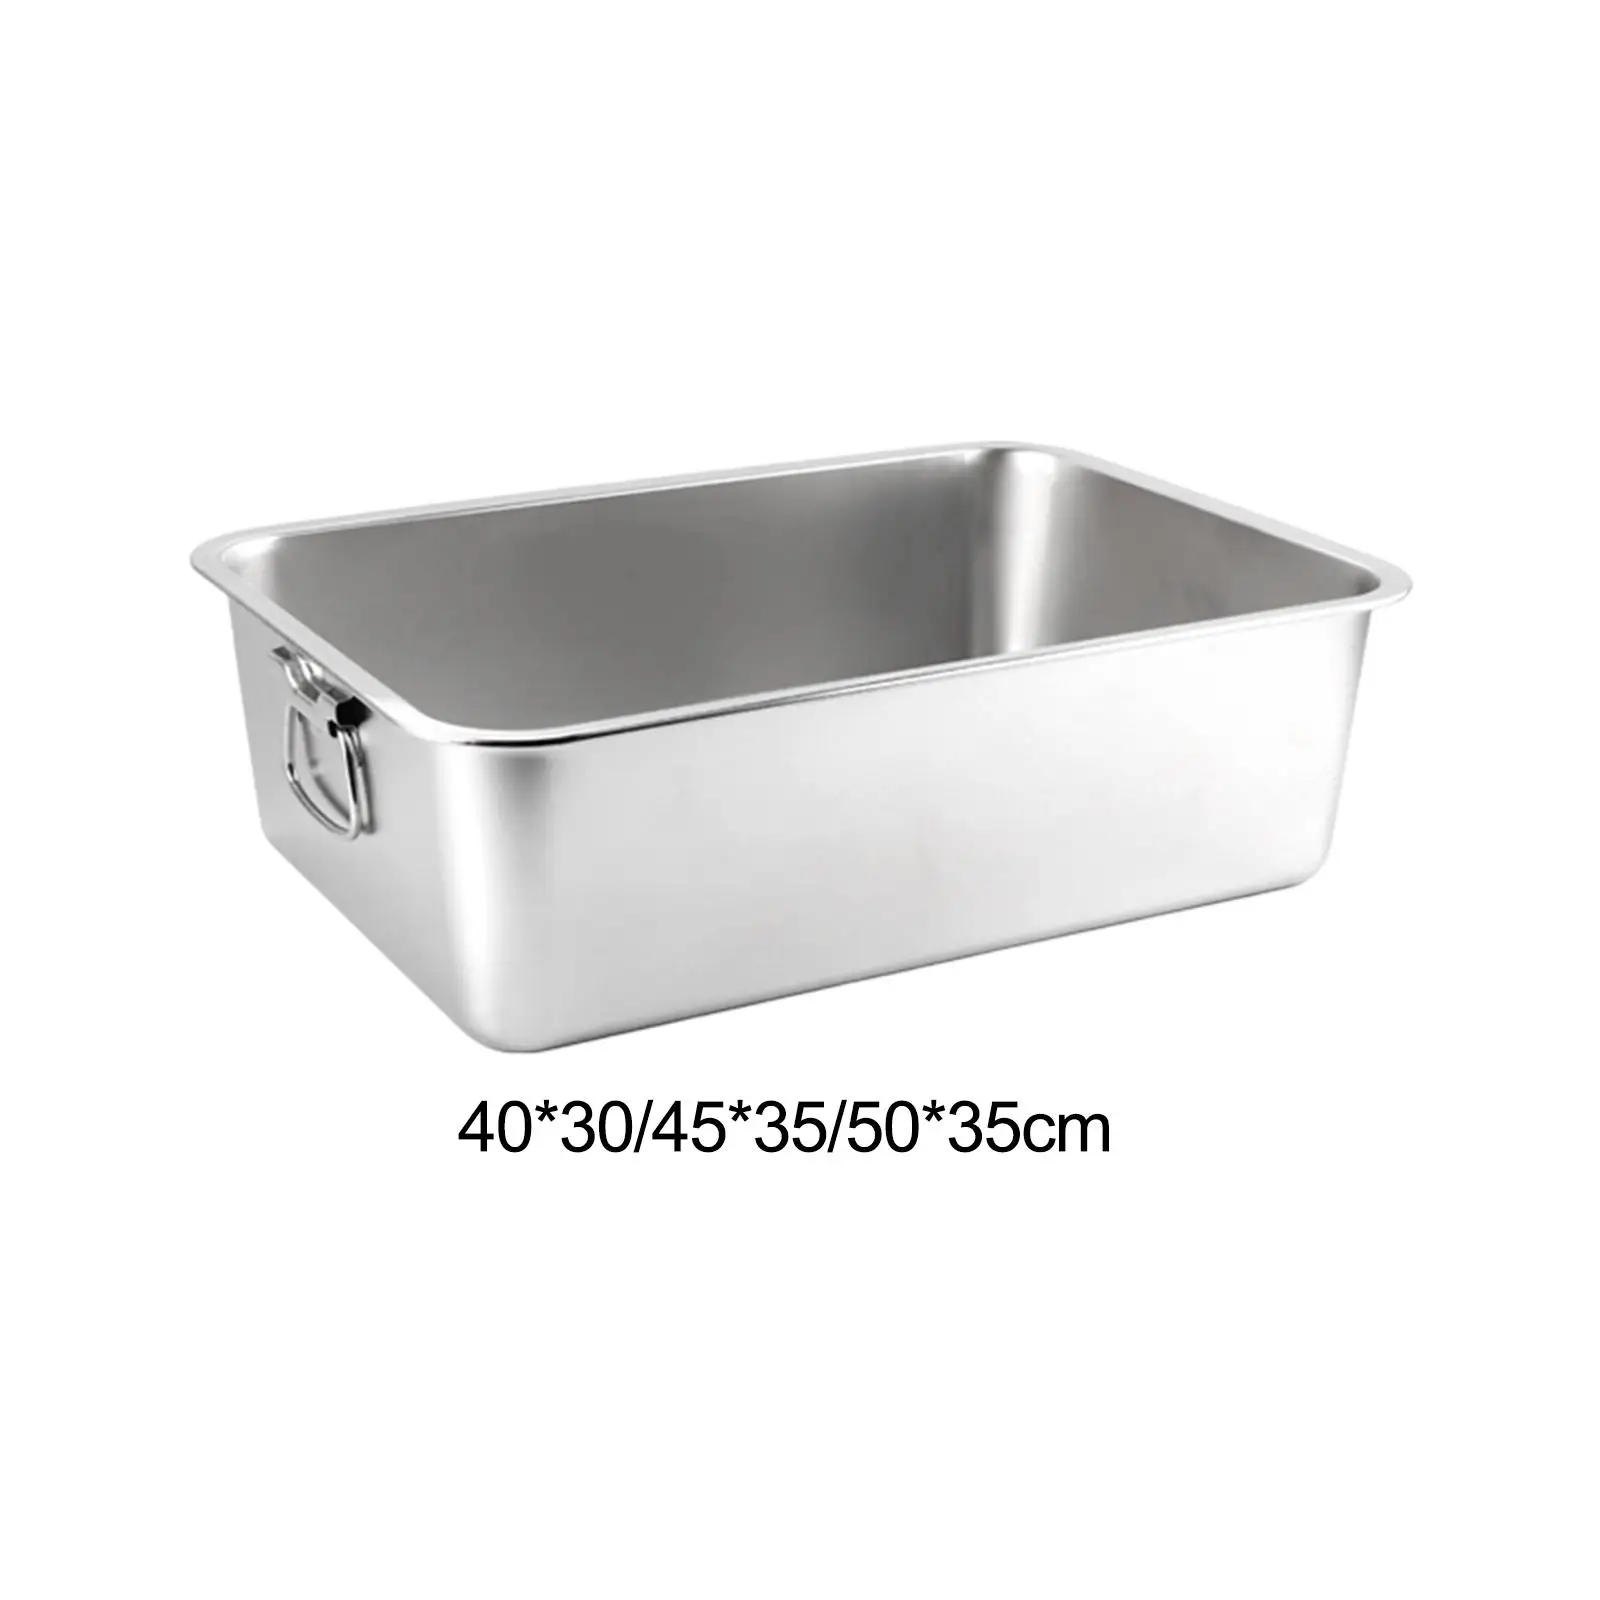 Open Litter Box for Indoor Cats, Kitten Potty Toilet Stainless Steel Container Kitten Potty Pan for Small Large Cats